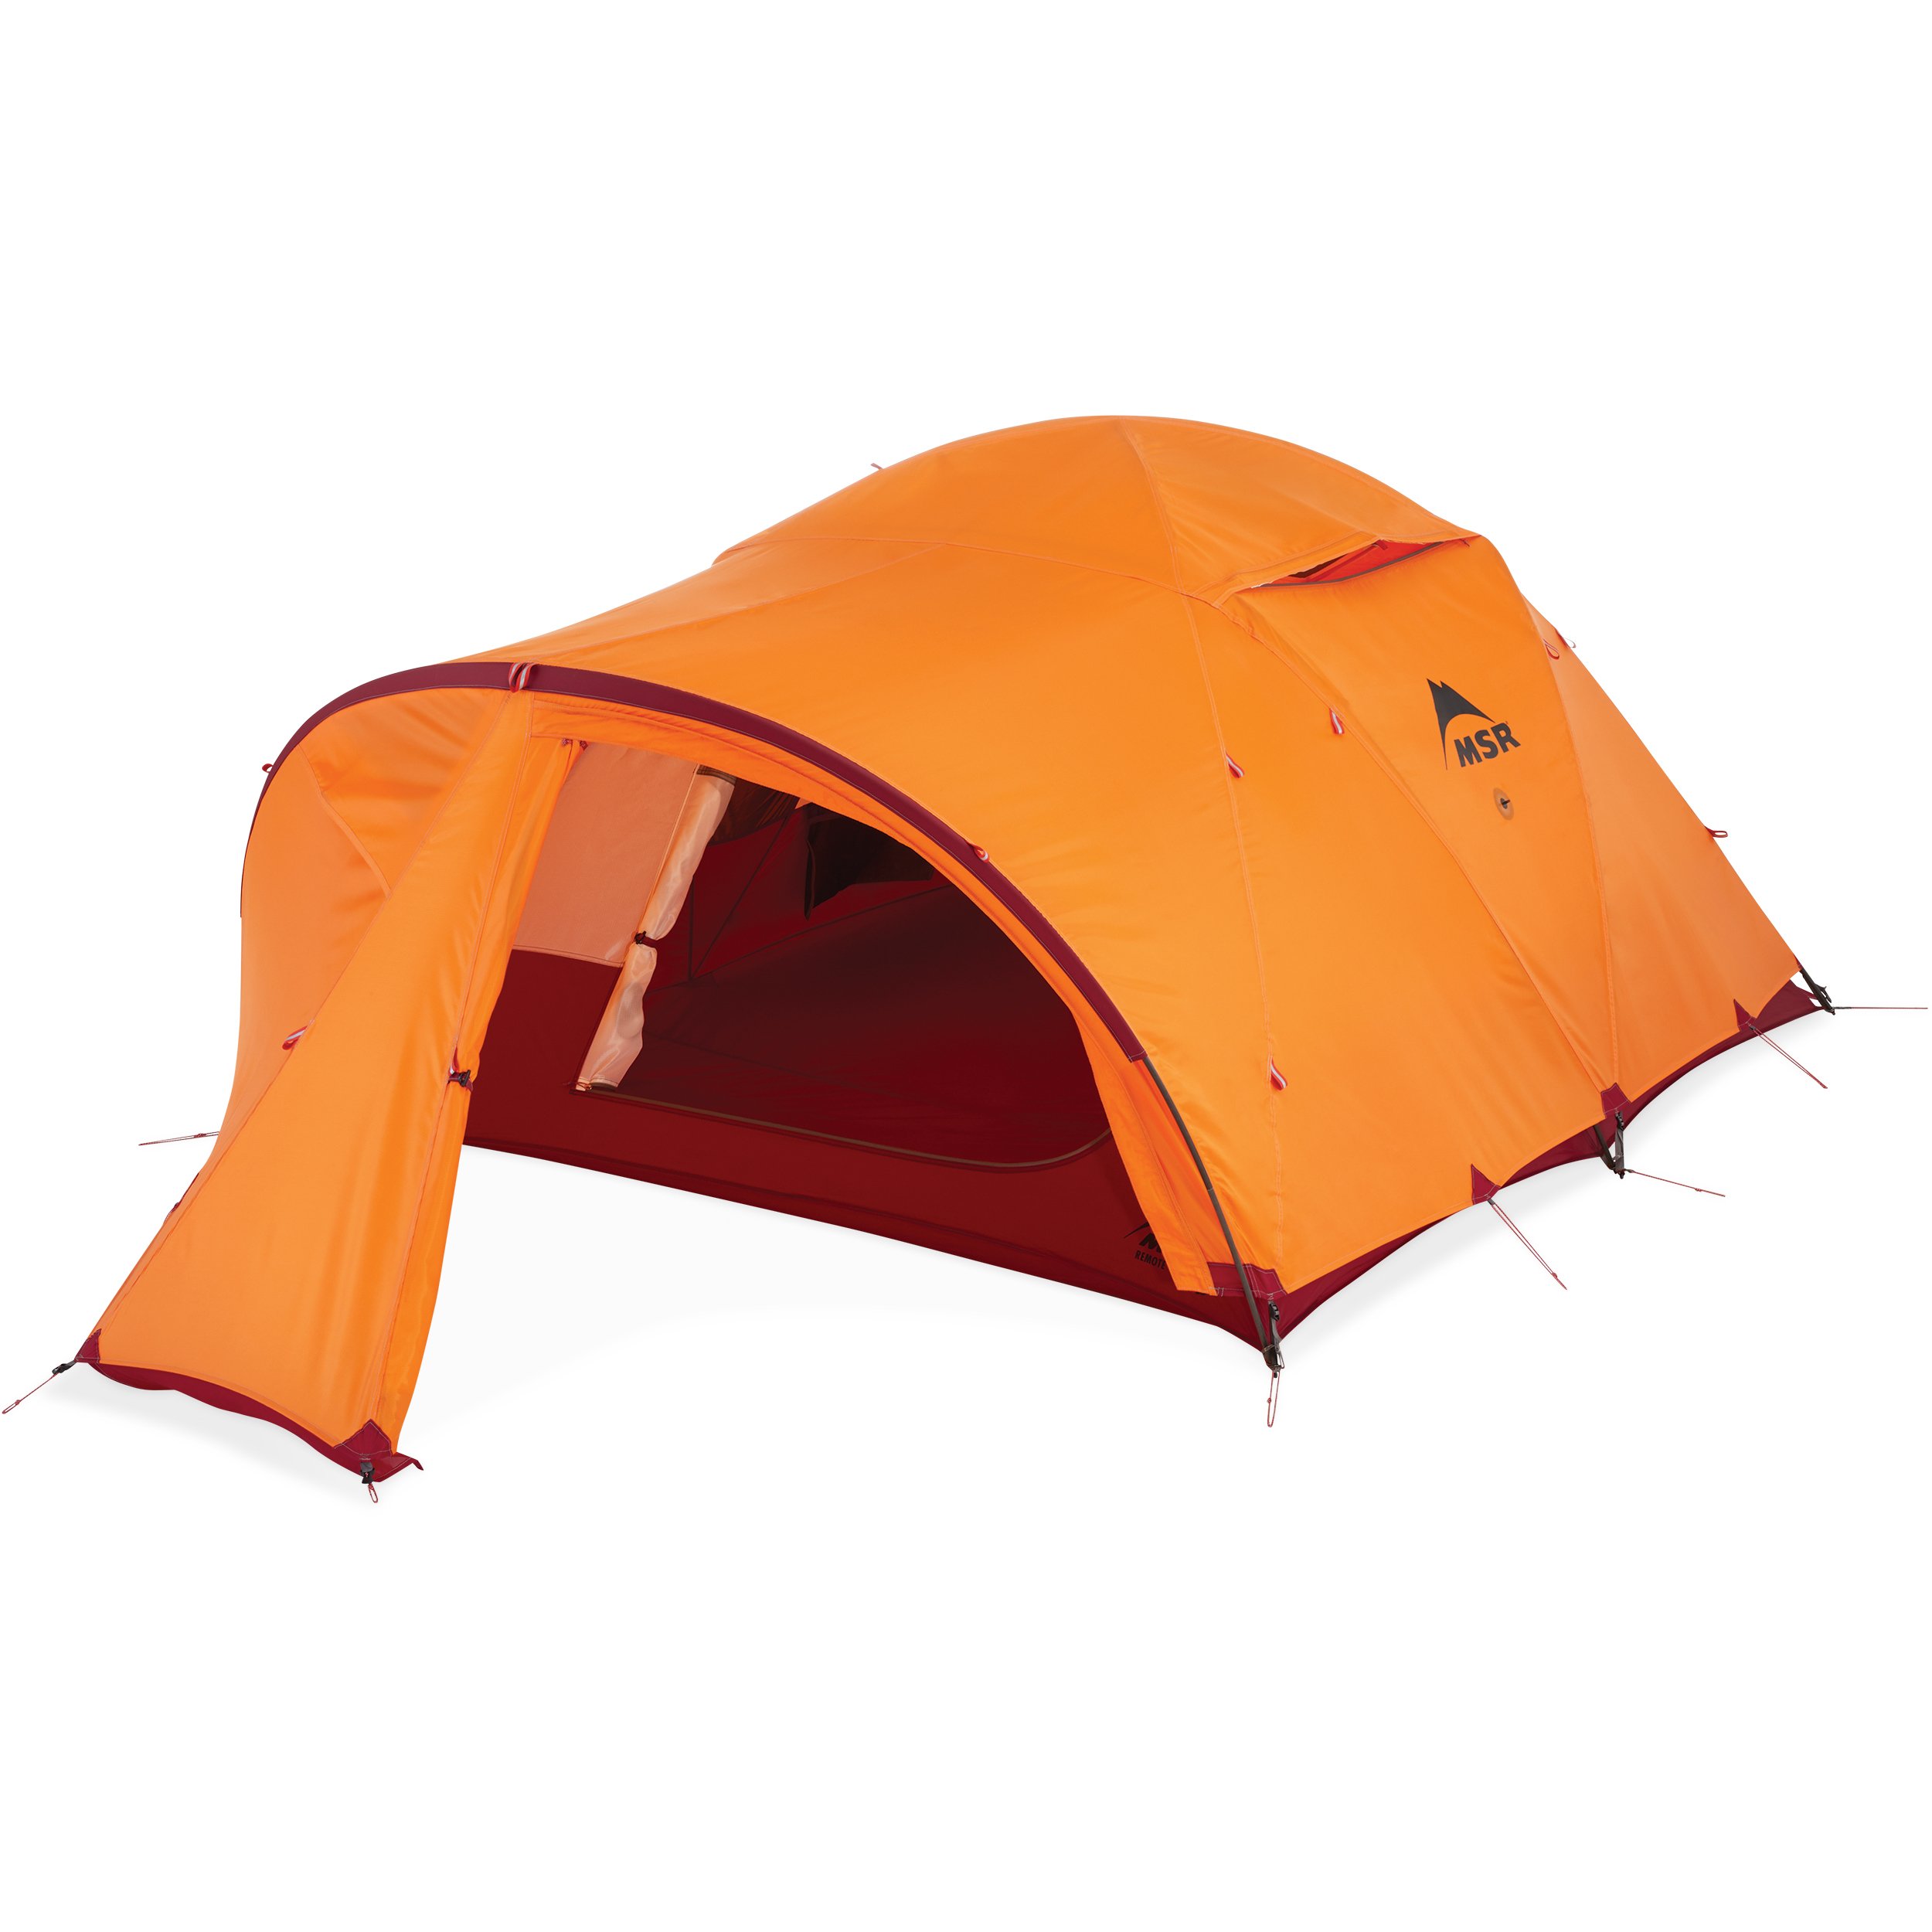 Remote™ 3 - Roomy 3-Person, Mountain Tent | MSR®